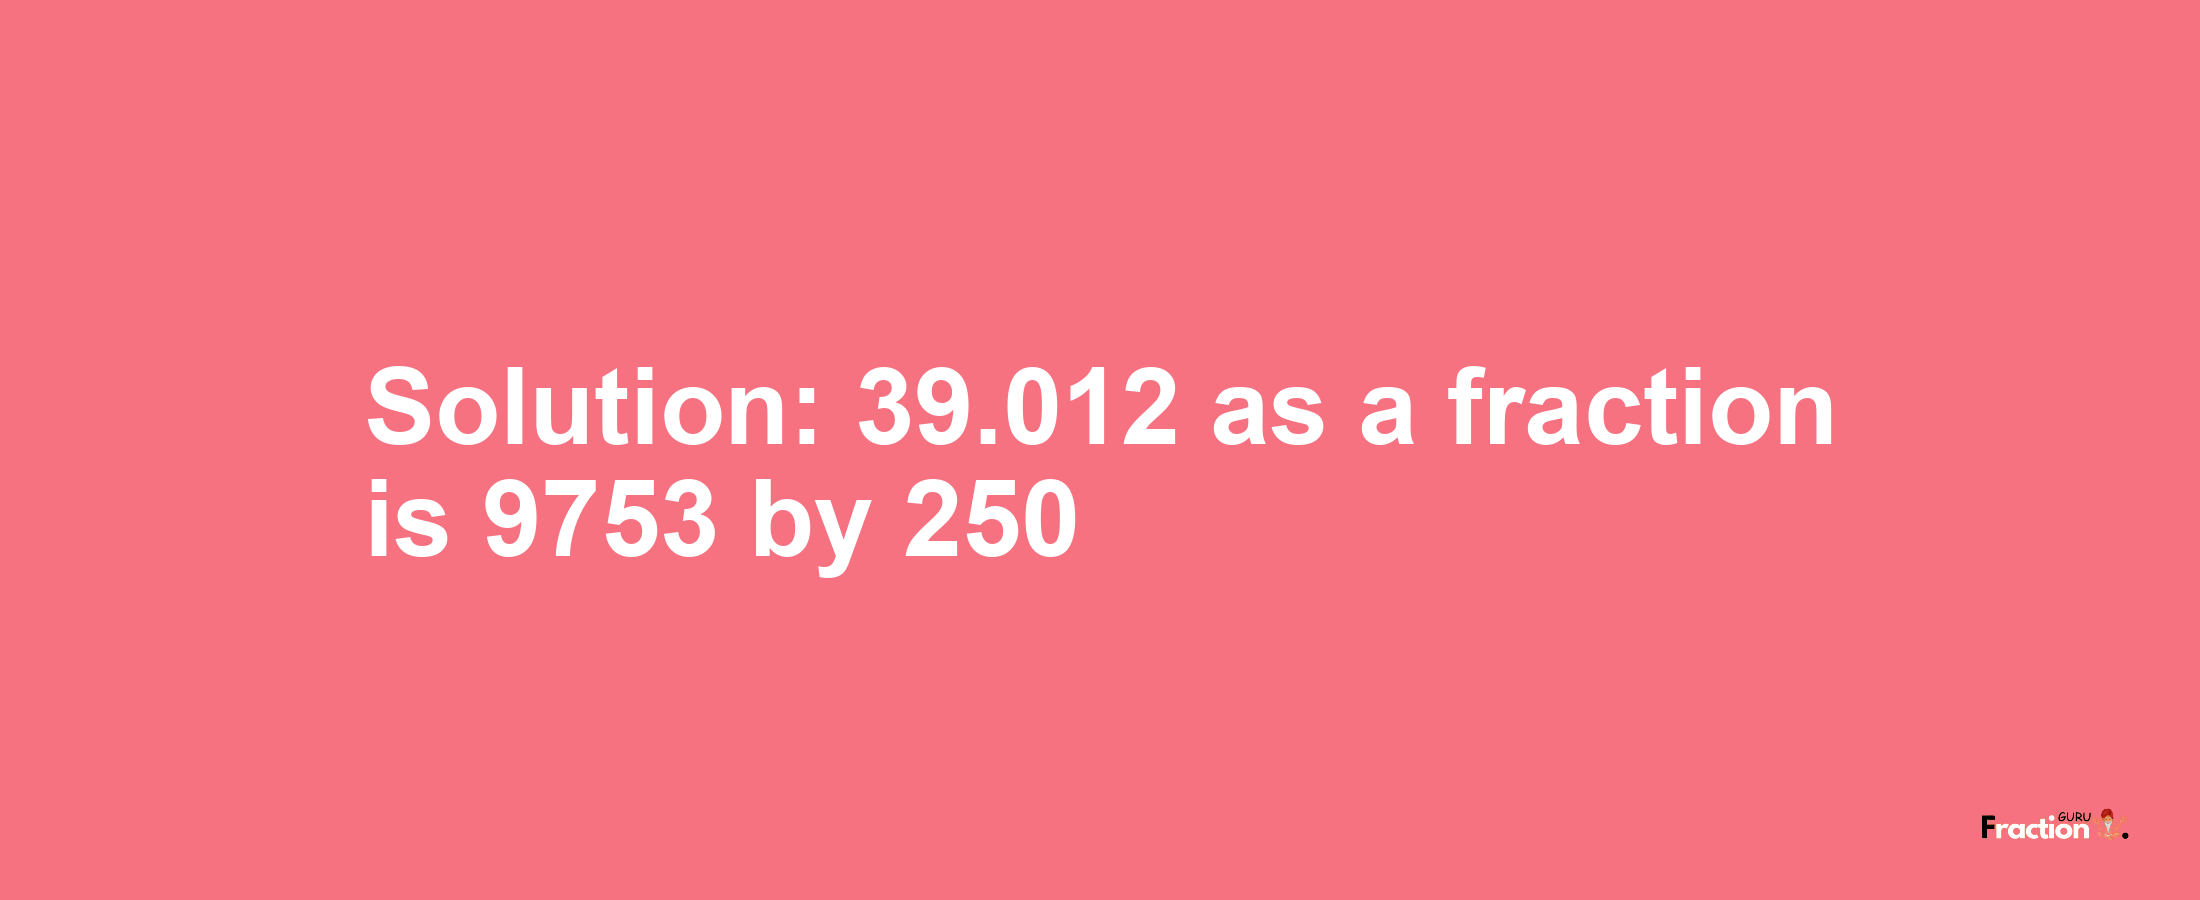 Solution:39.012 as a fraction is 9753/250